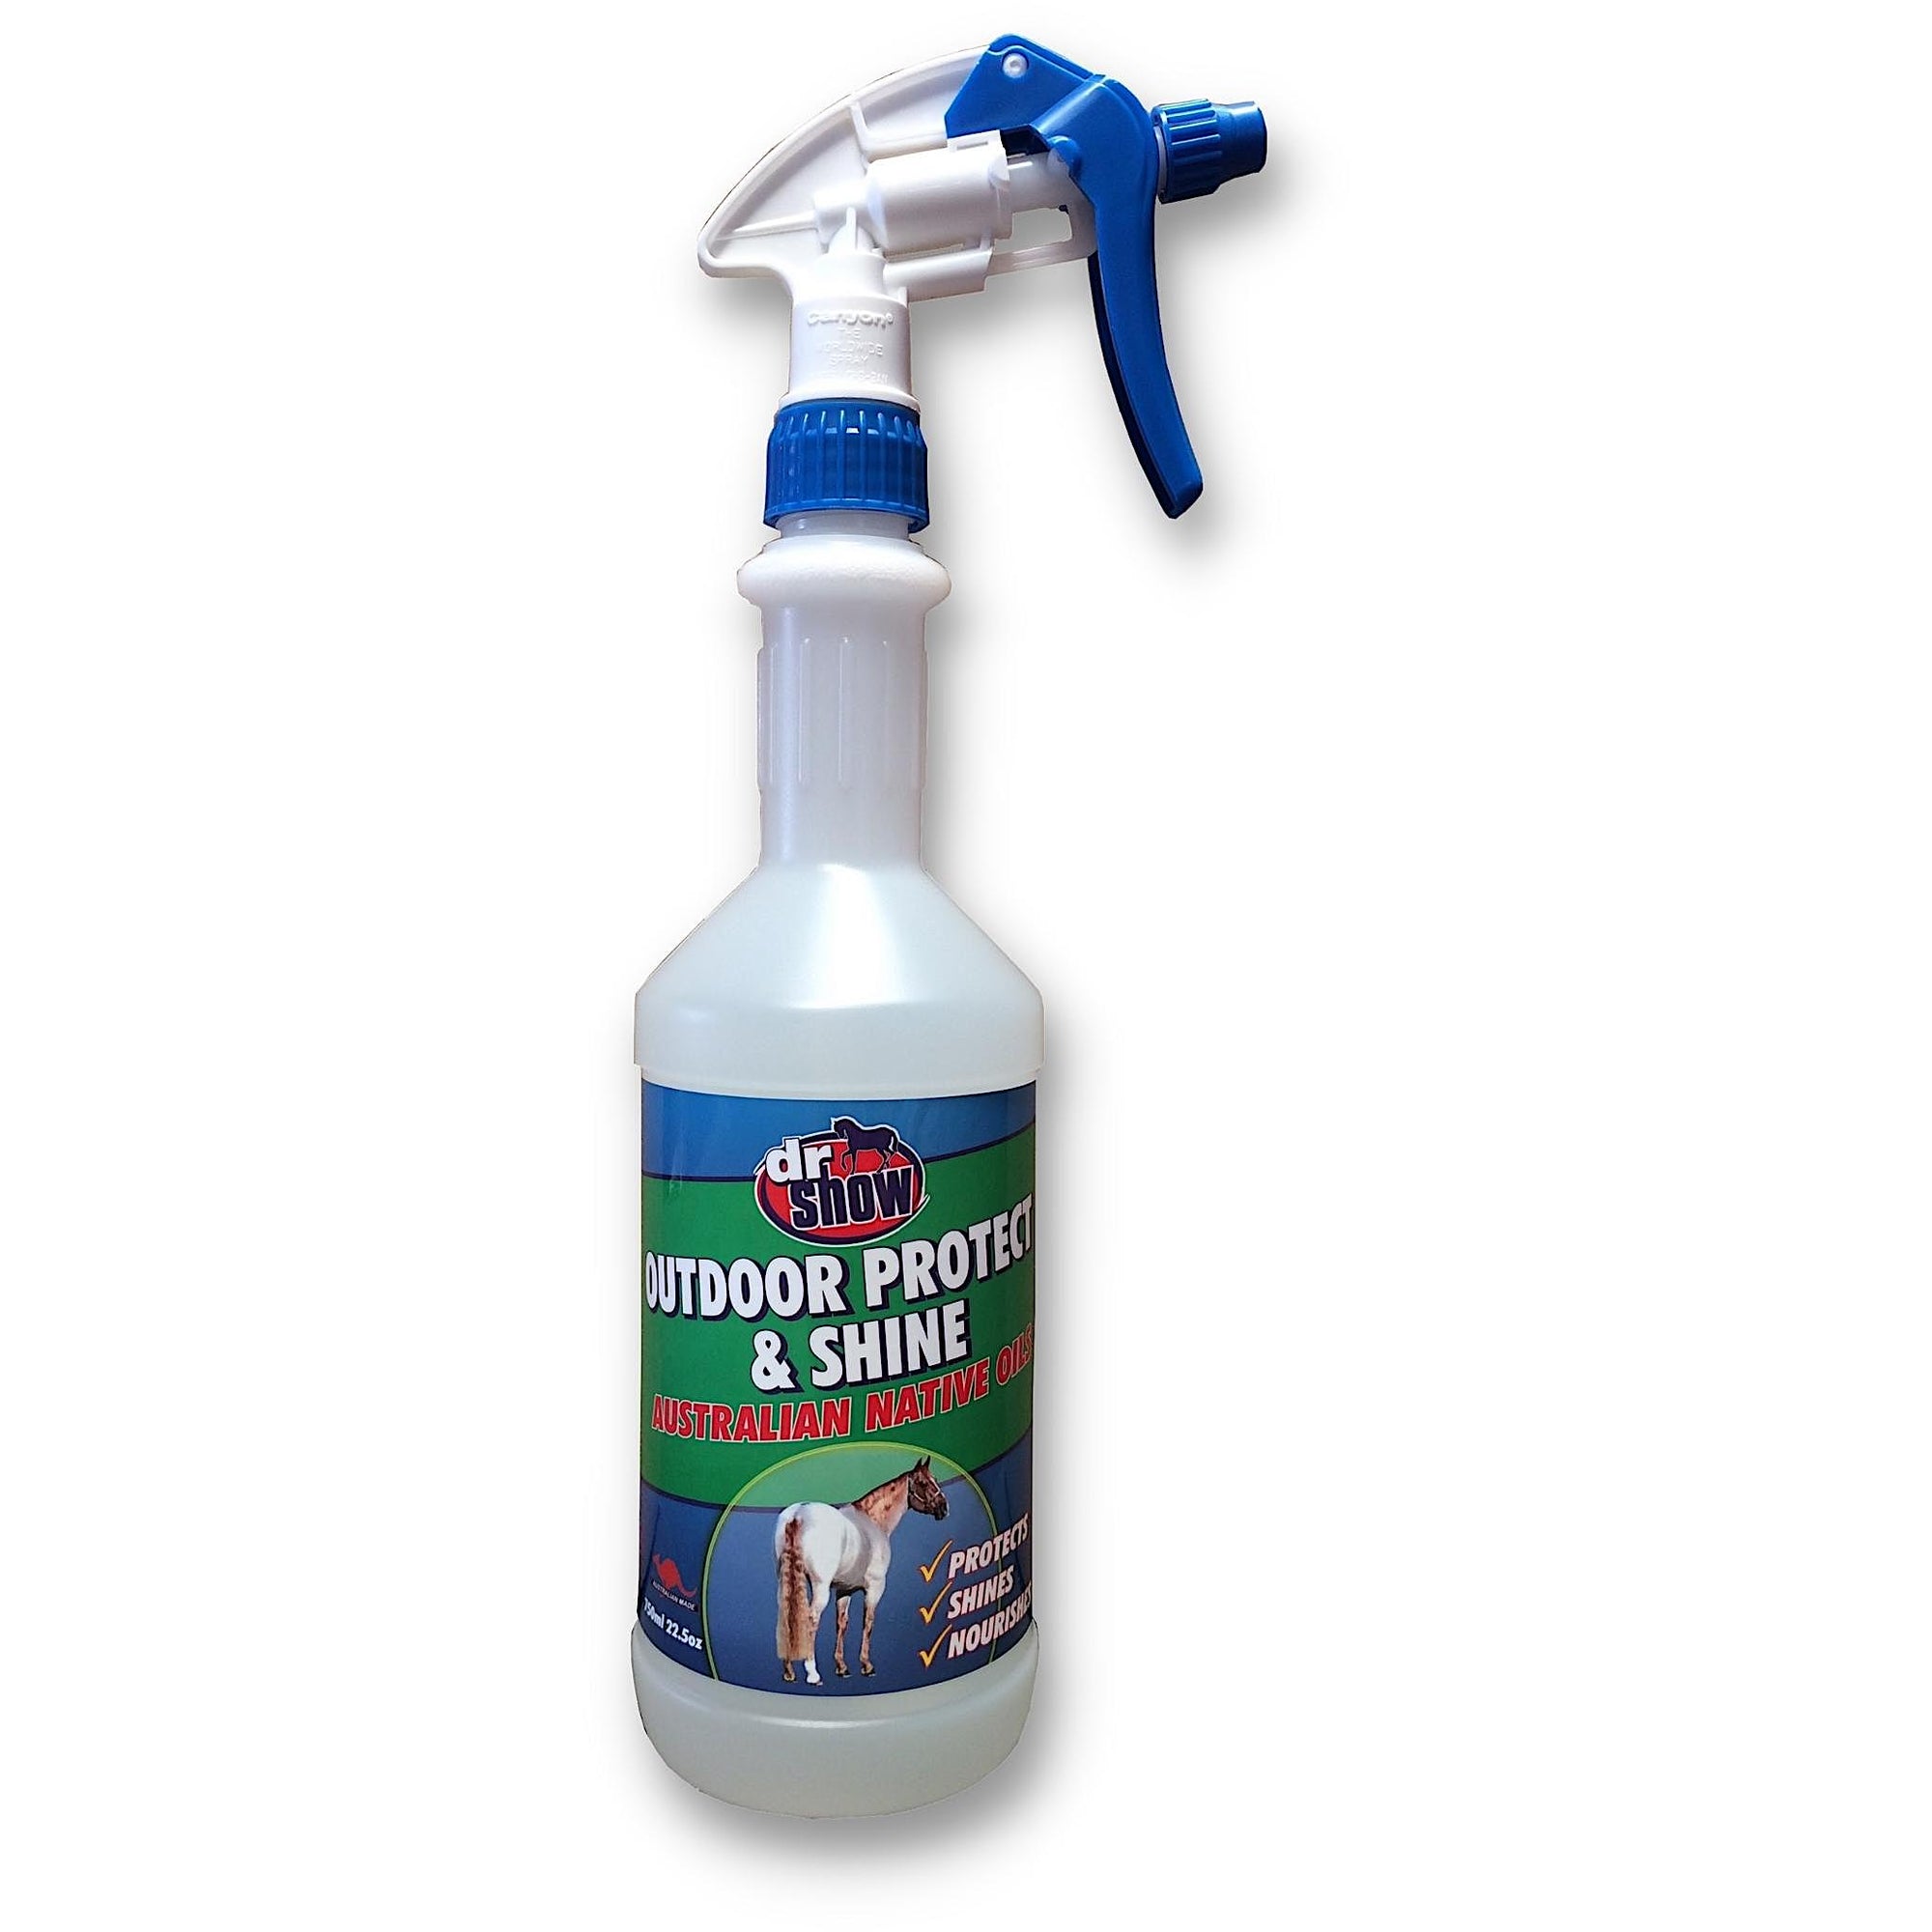 Dr show outdoor and protect in spray bottle with blue and green label.